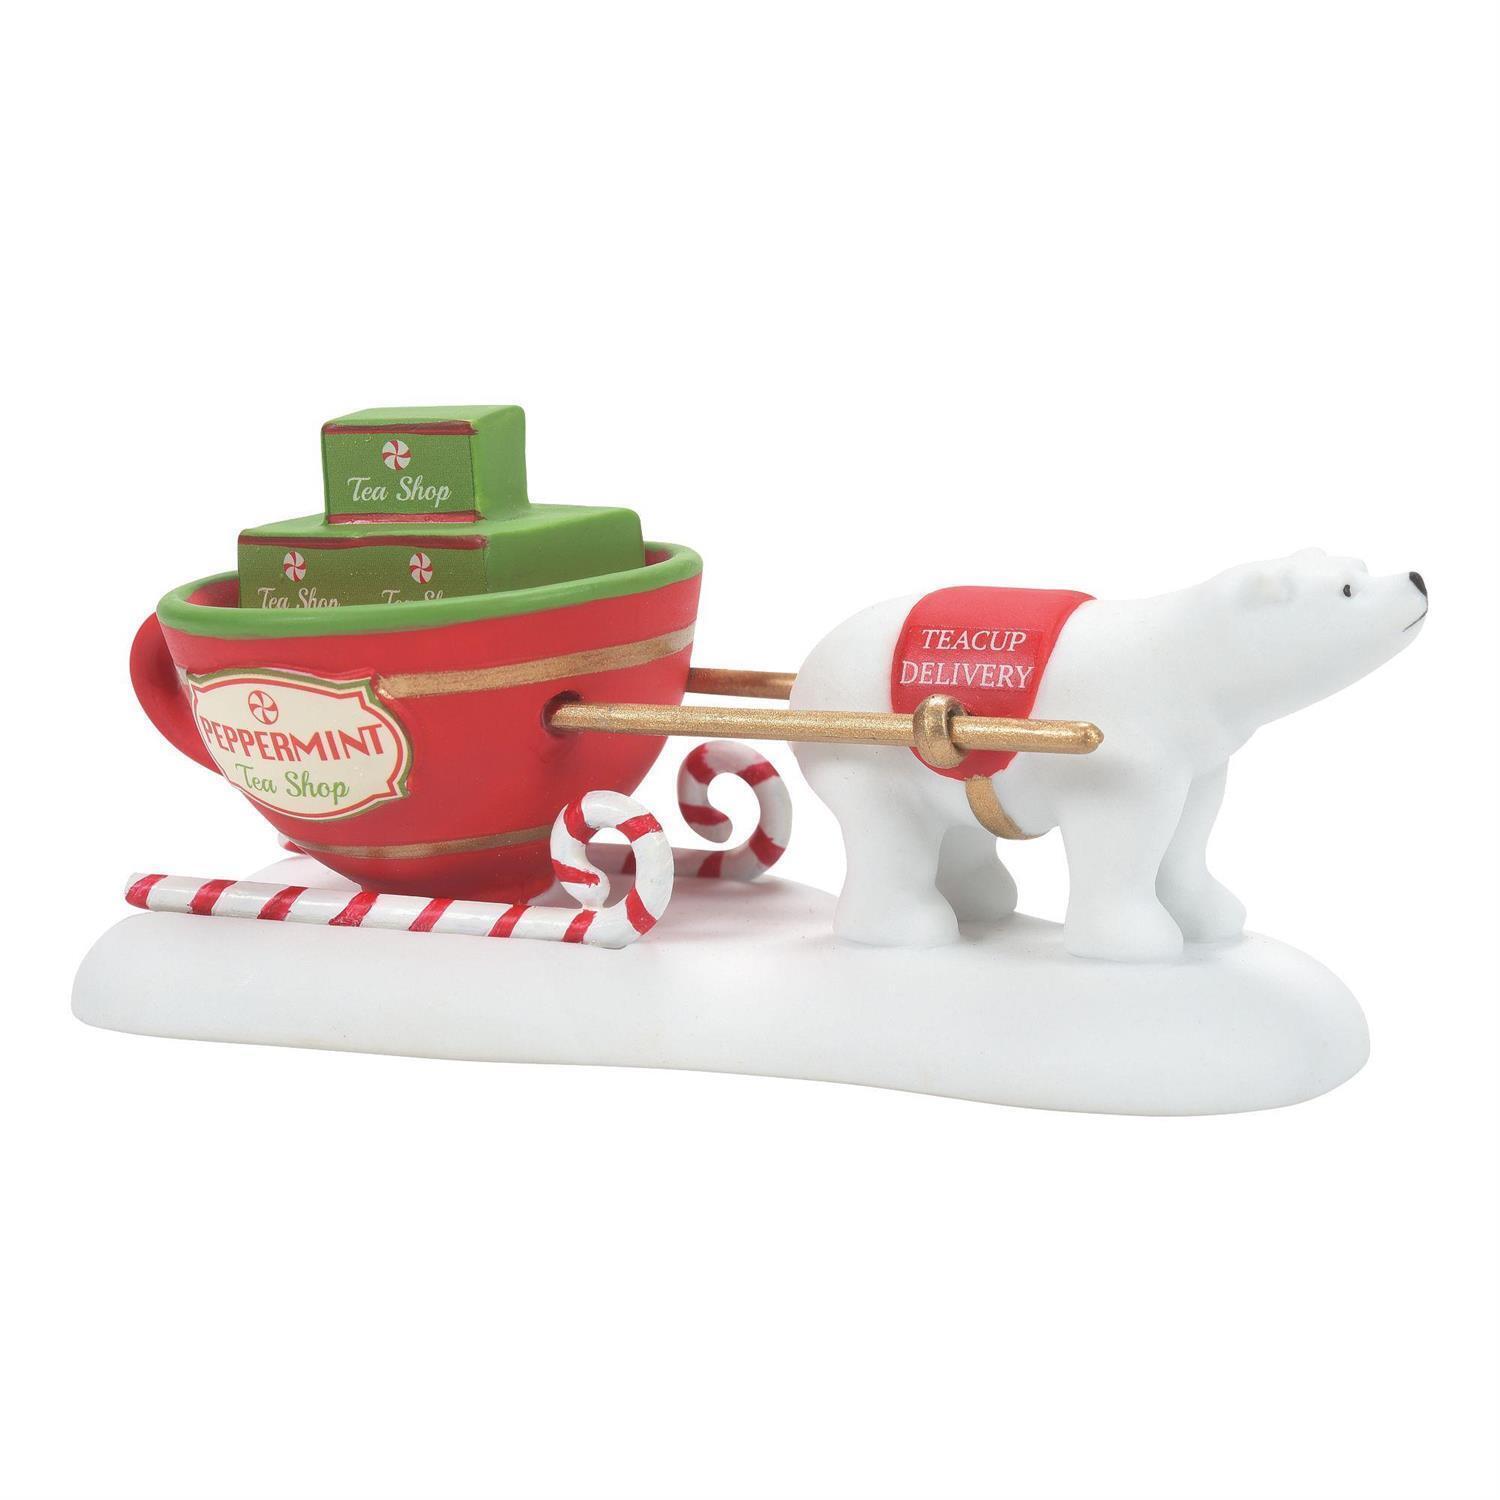 Department 56 North Pole Series Accessory Teacup Delivery Service 6011407